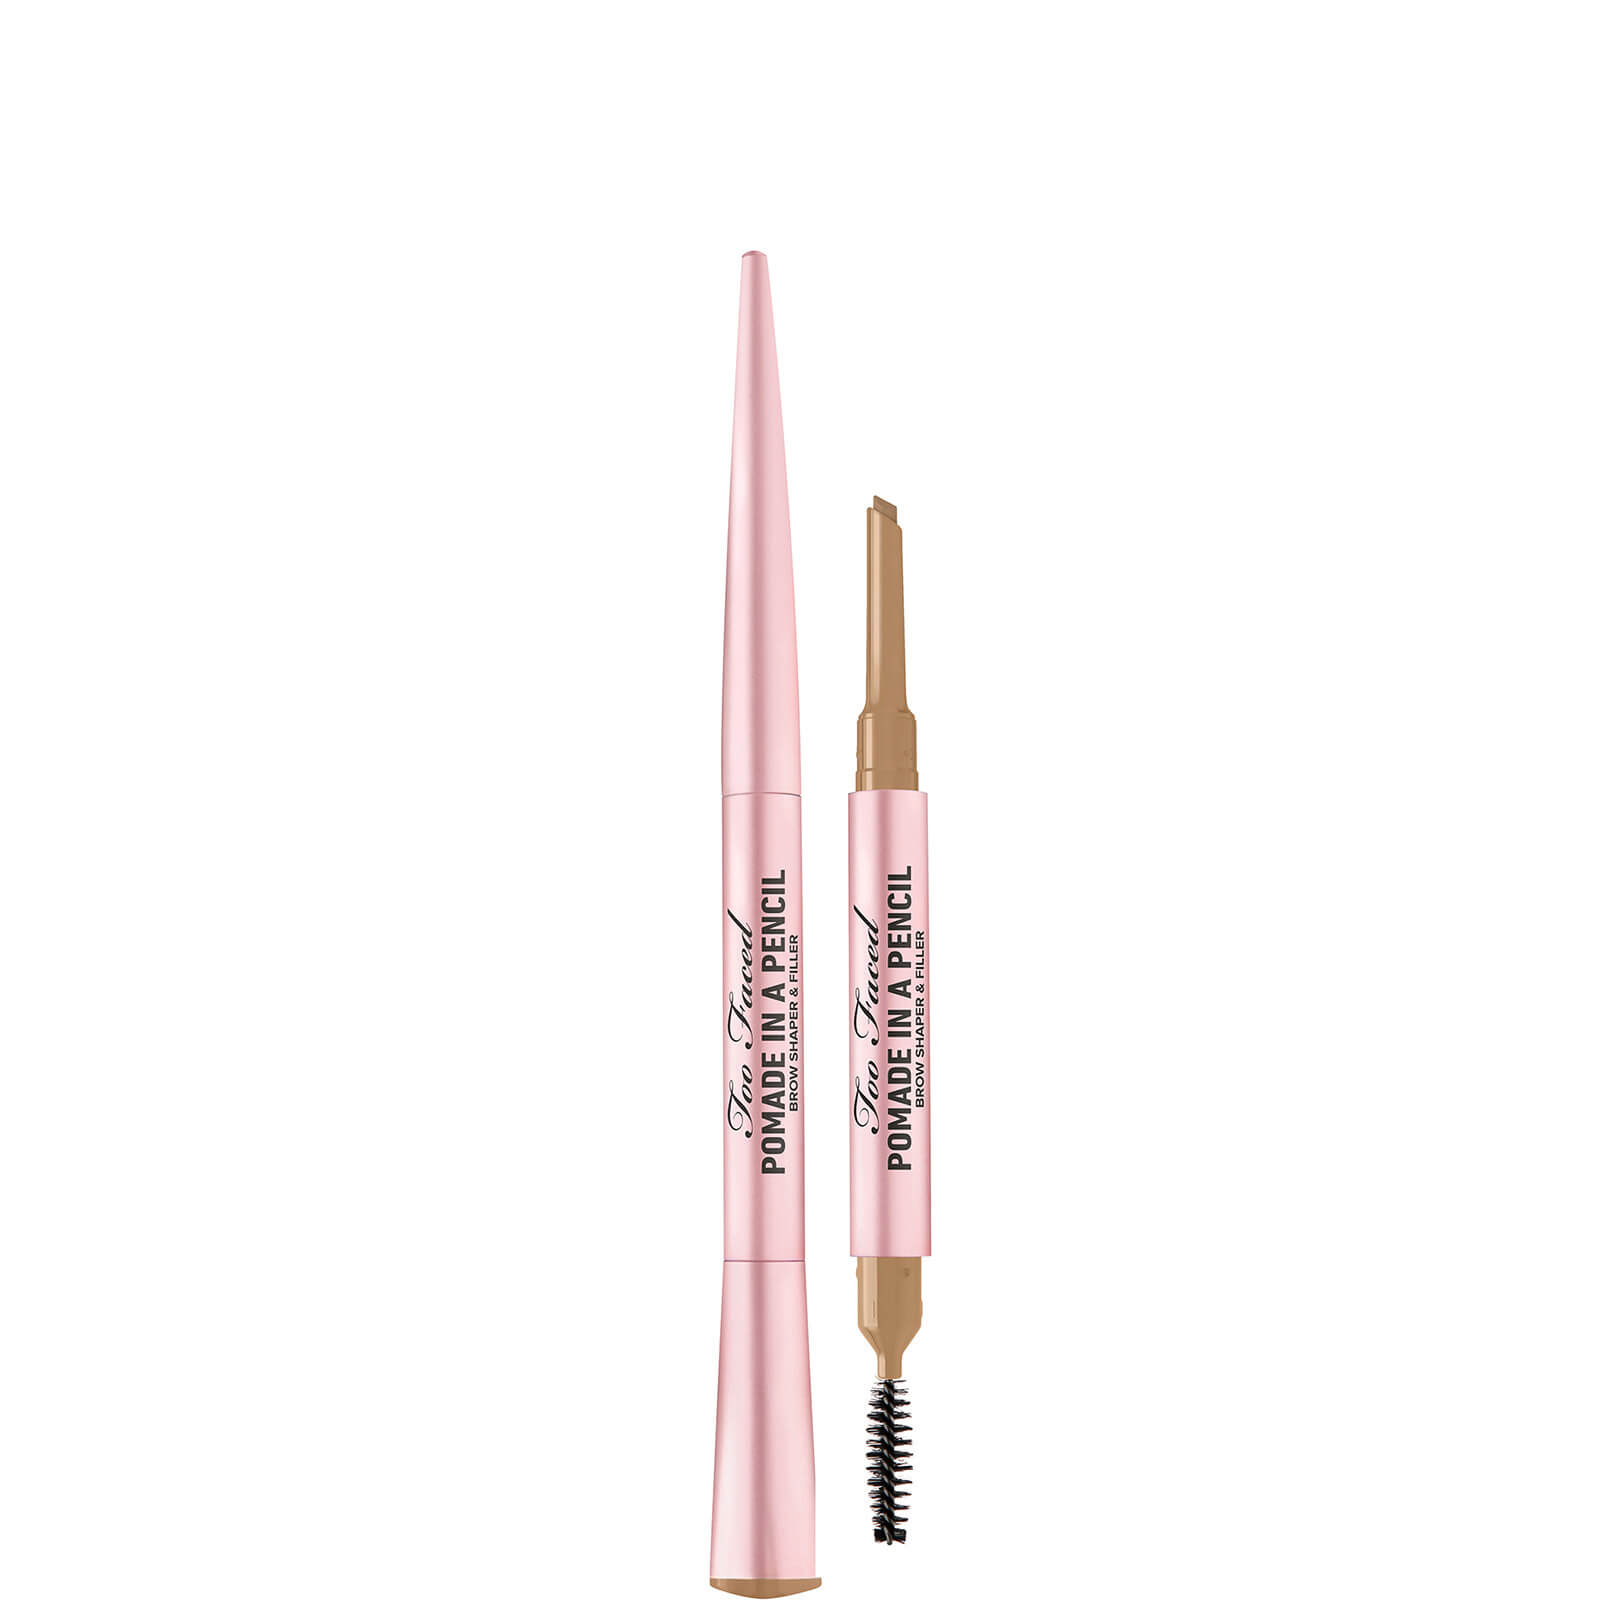 Too Faced Brow Pomade in a Pencil 0.19g (Various Shades) - Natural Blonde